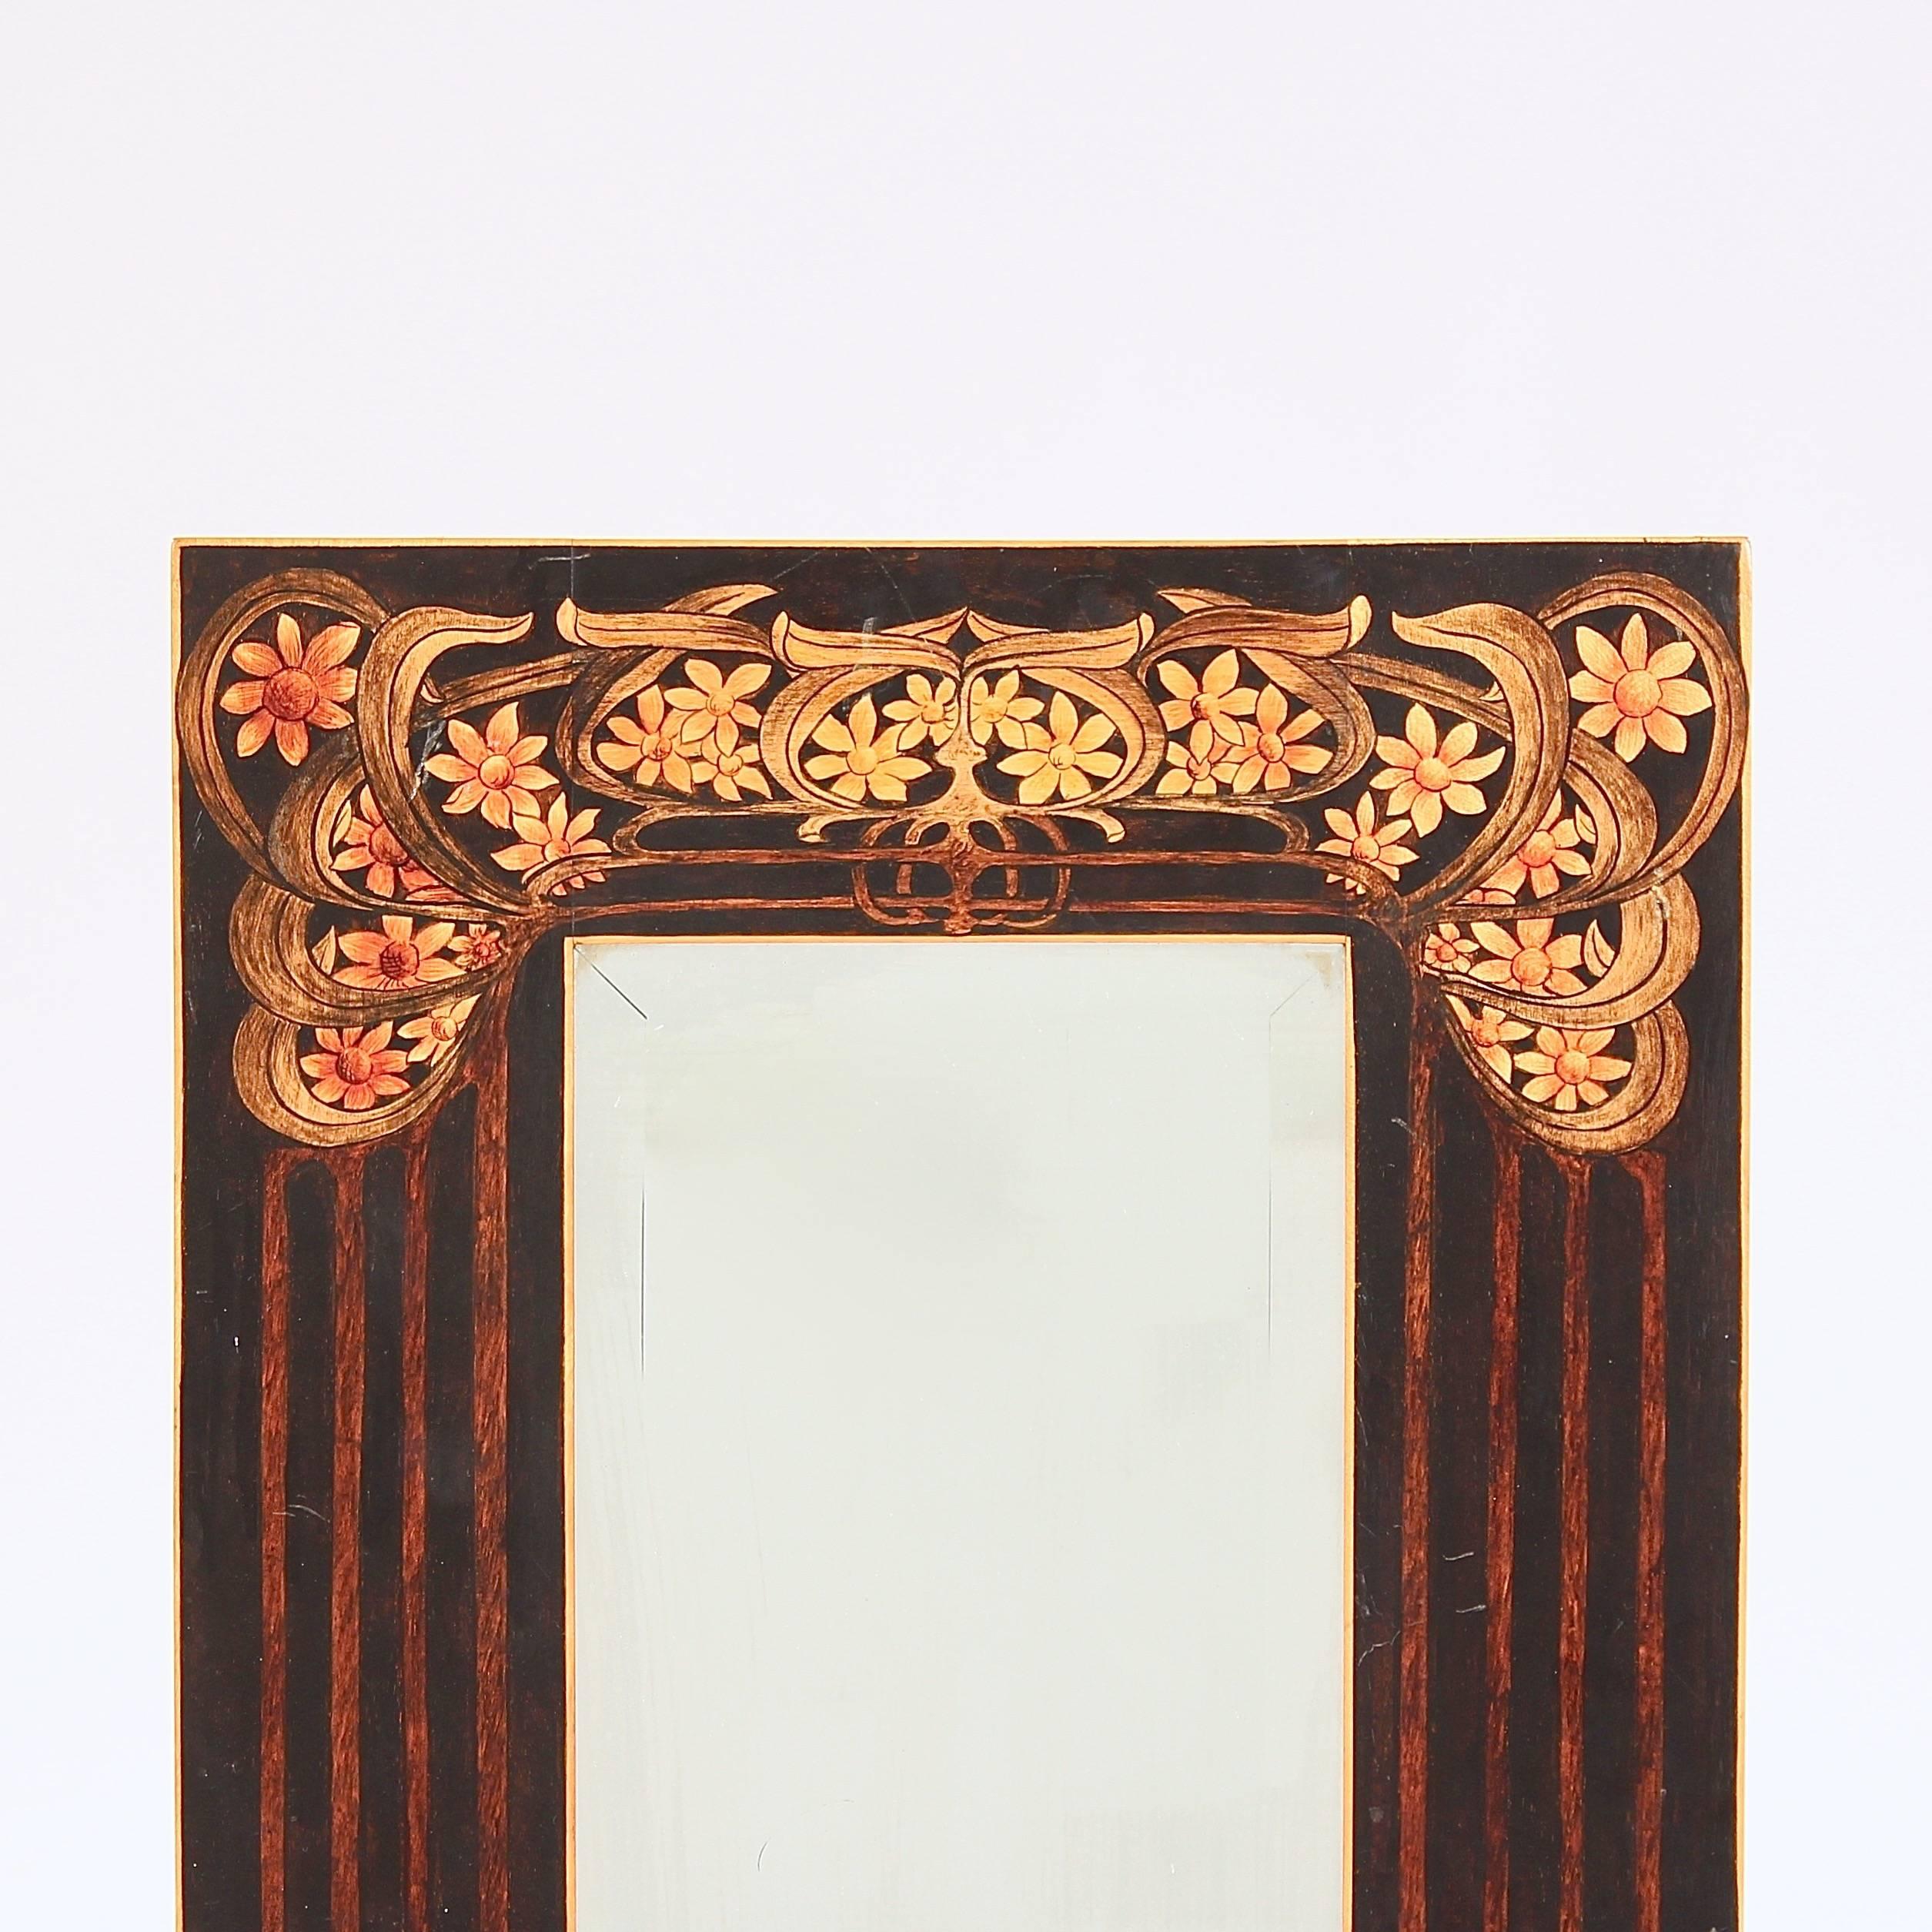 The stained wood frame with floral and line decoration with a boxwood fillet and bevelled plate,

England, circa 1895.